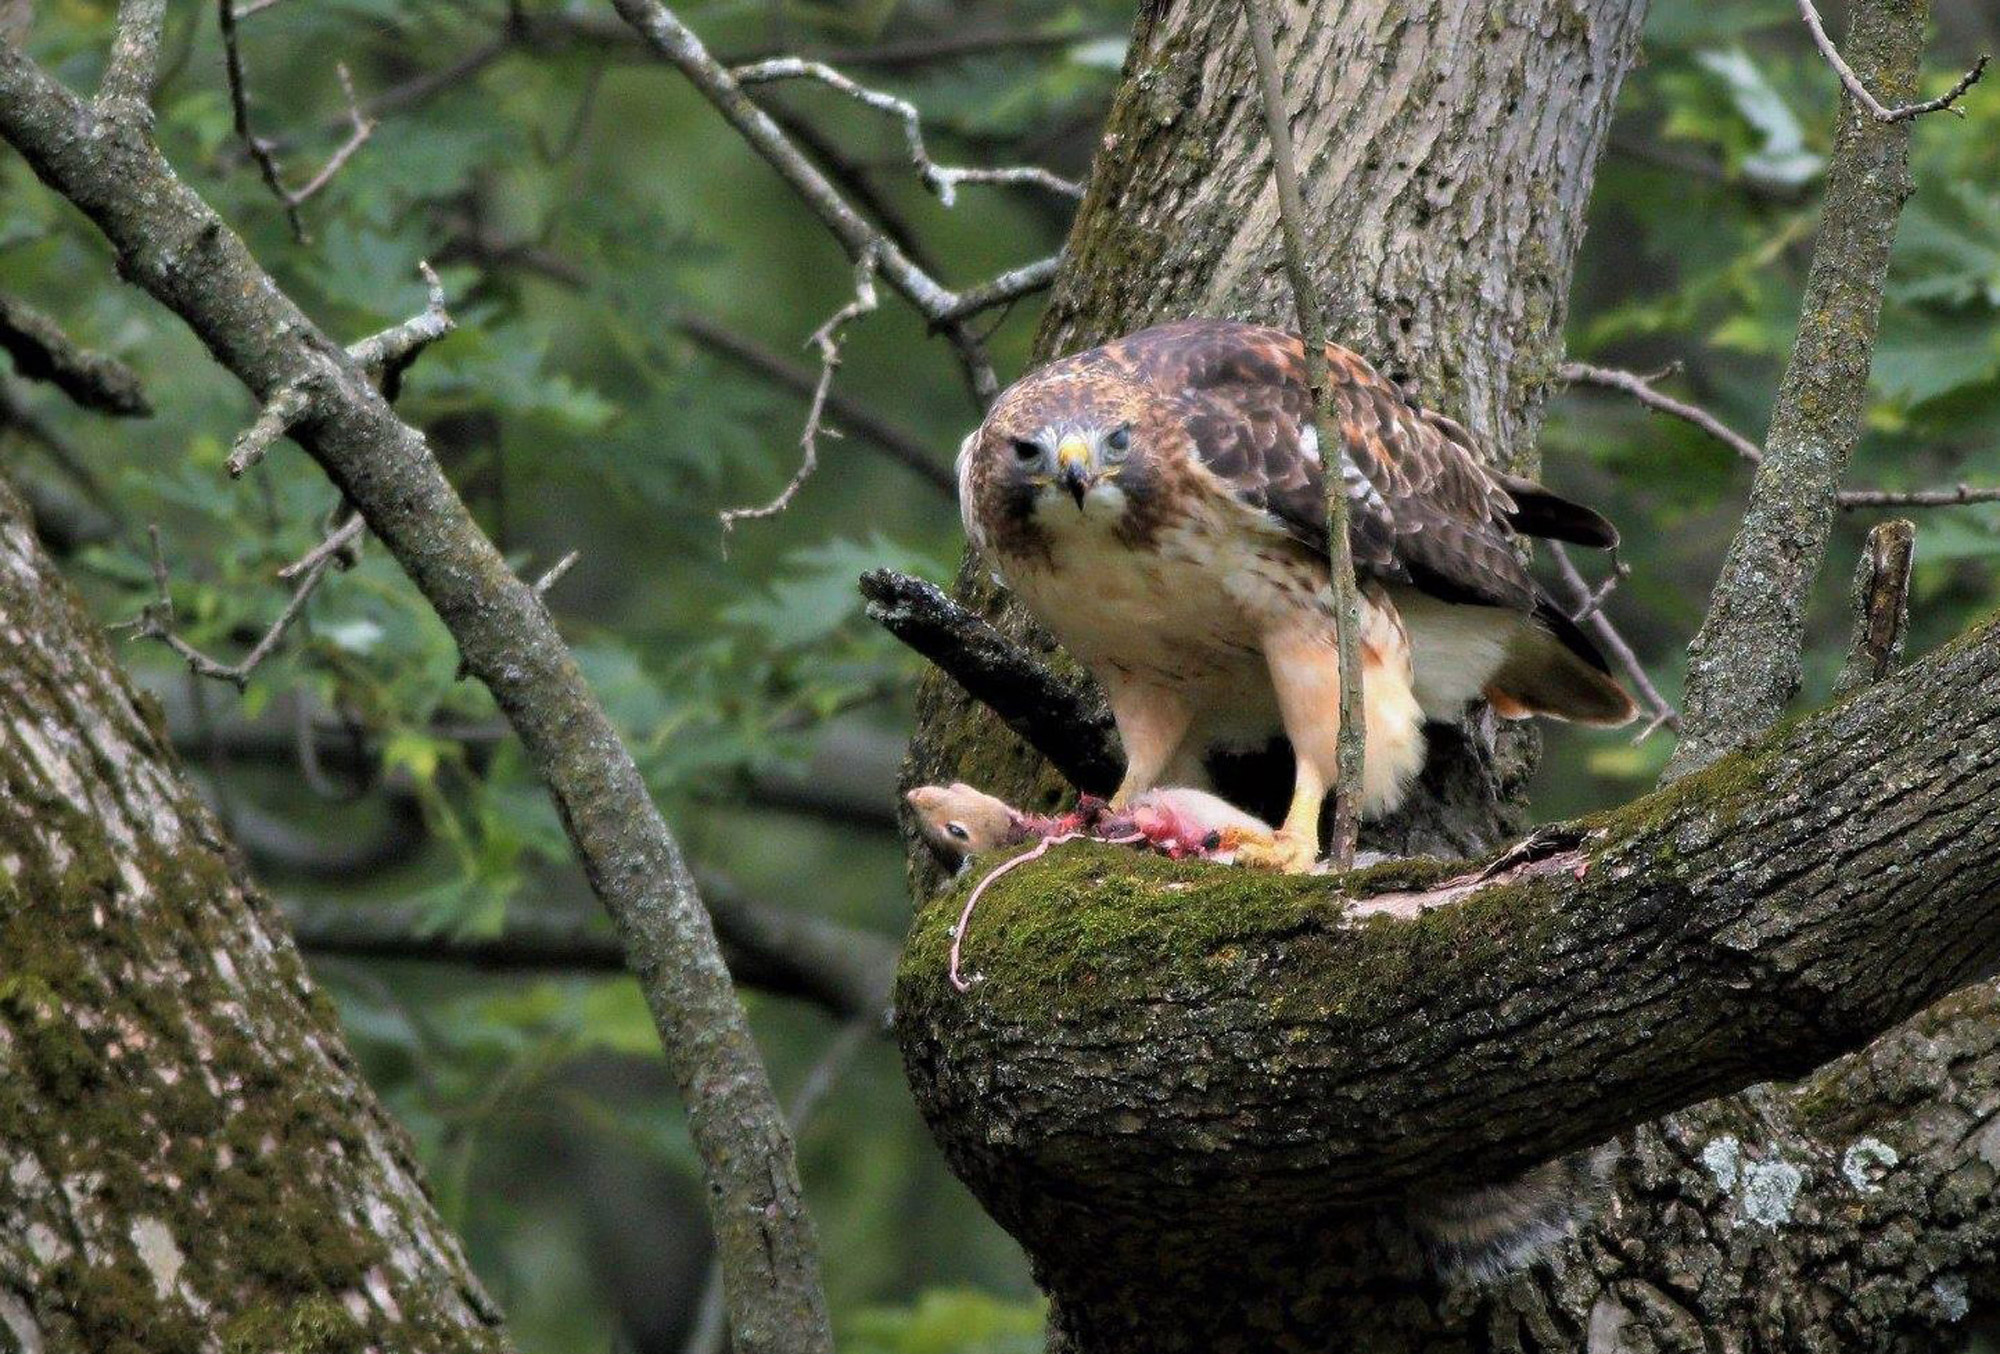 A red-tailed hawk looking at the camera with a squirrel in its talons.